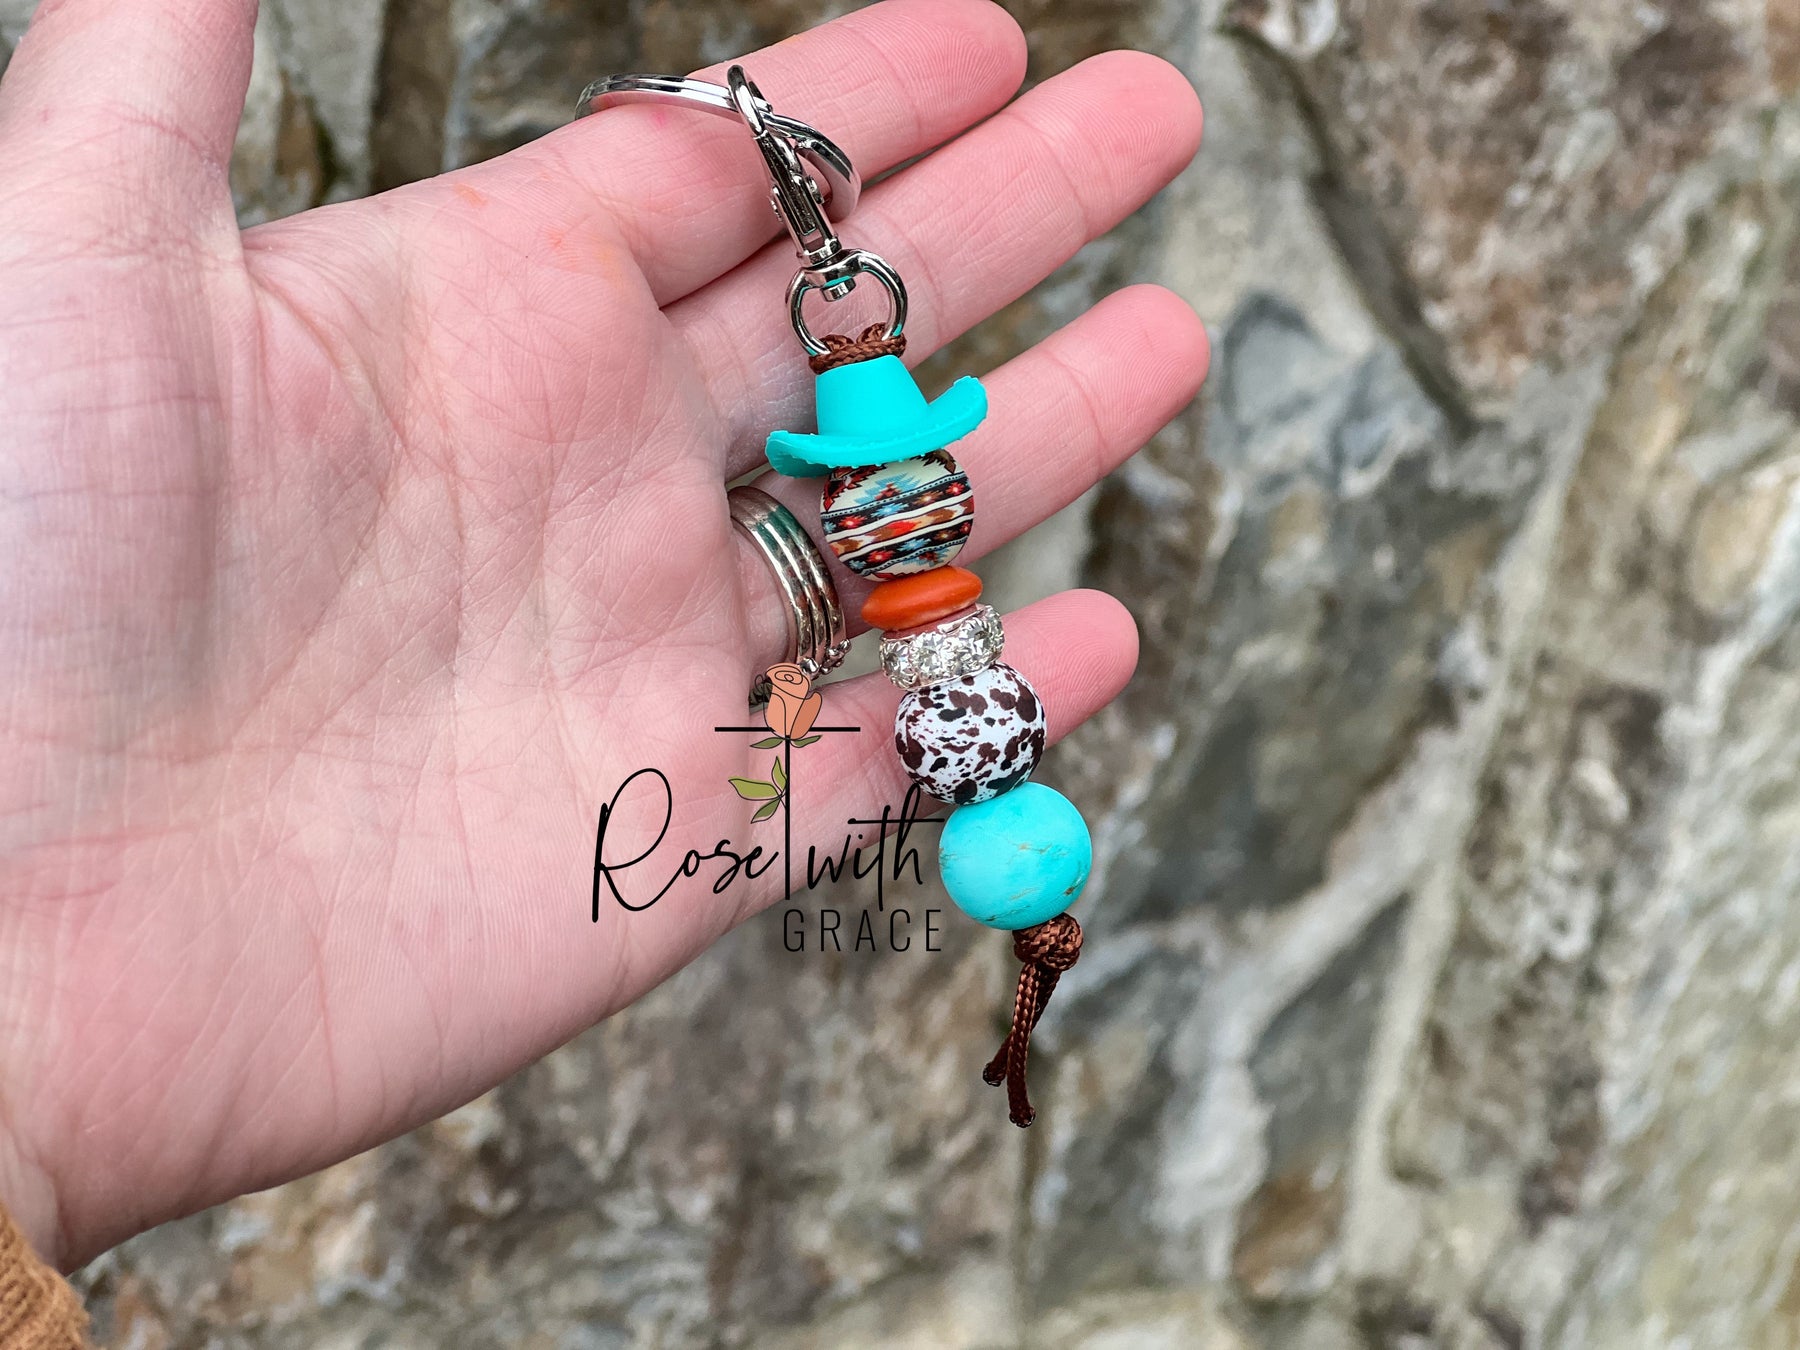 Aztec Cowgirl Mini Keychain Rose with Grace LLC